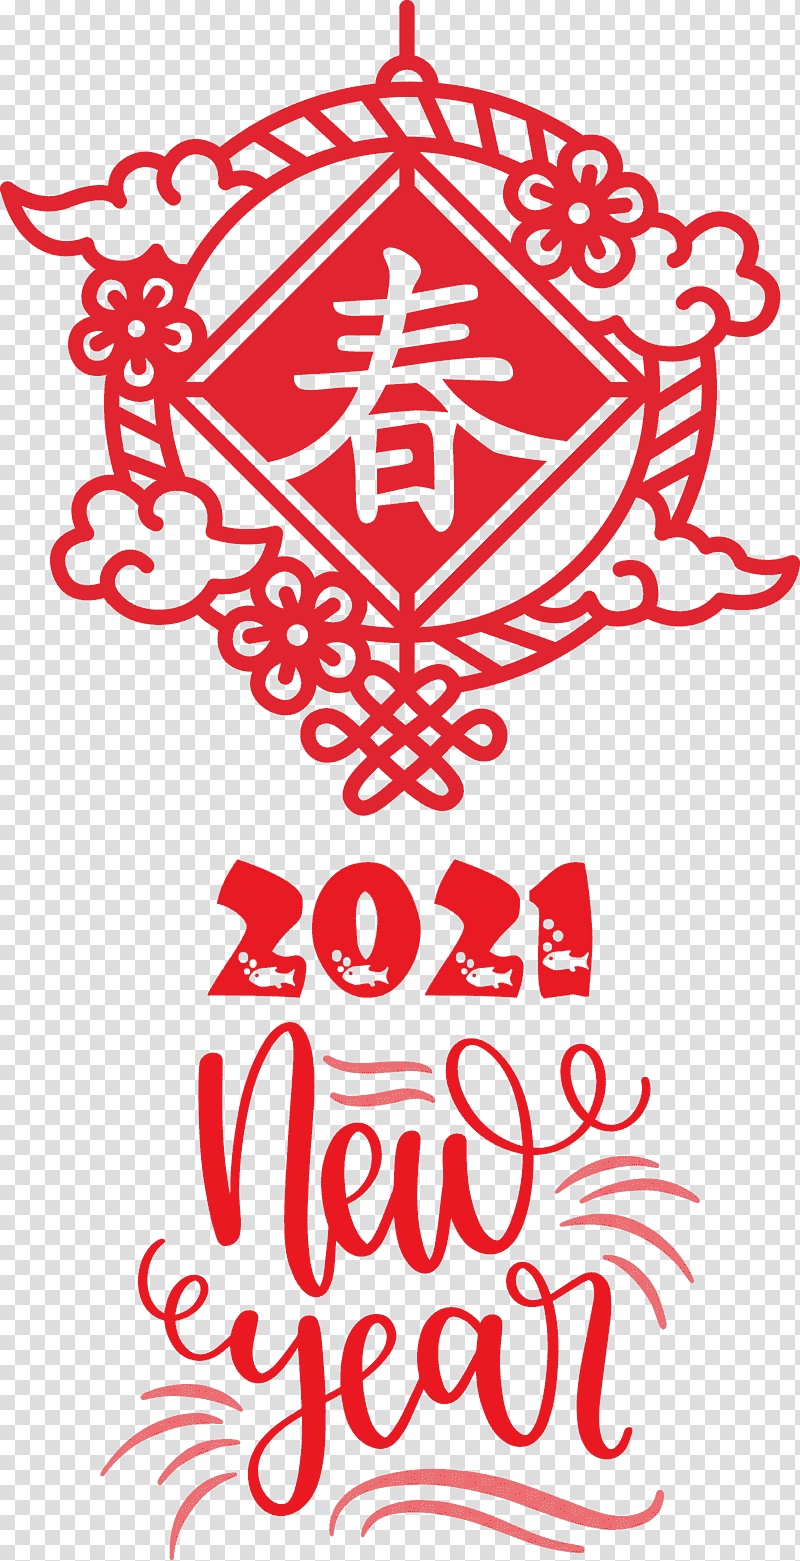 Happy Chinese New Year 2021 Chinese New Year Happy New Year, Visual Arts, Calligraphy, Logo, Text, Media, Data transparent background PNG clipart